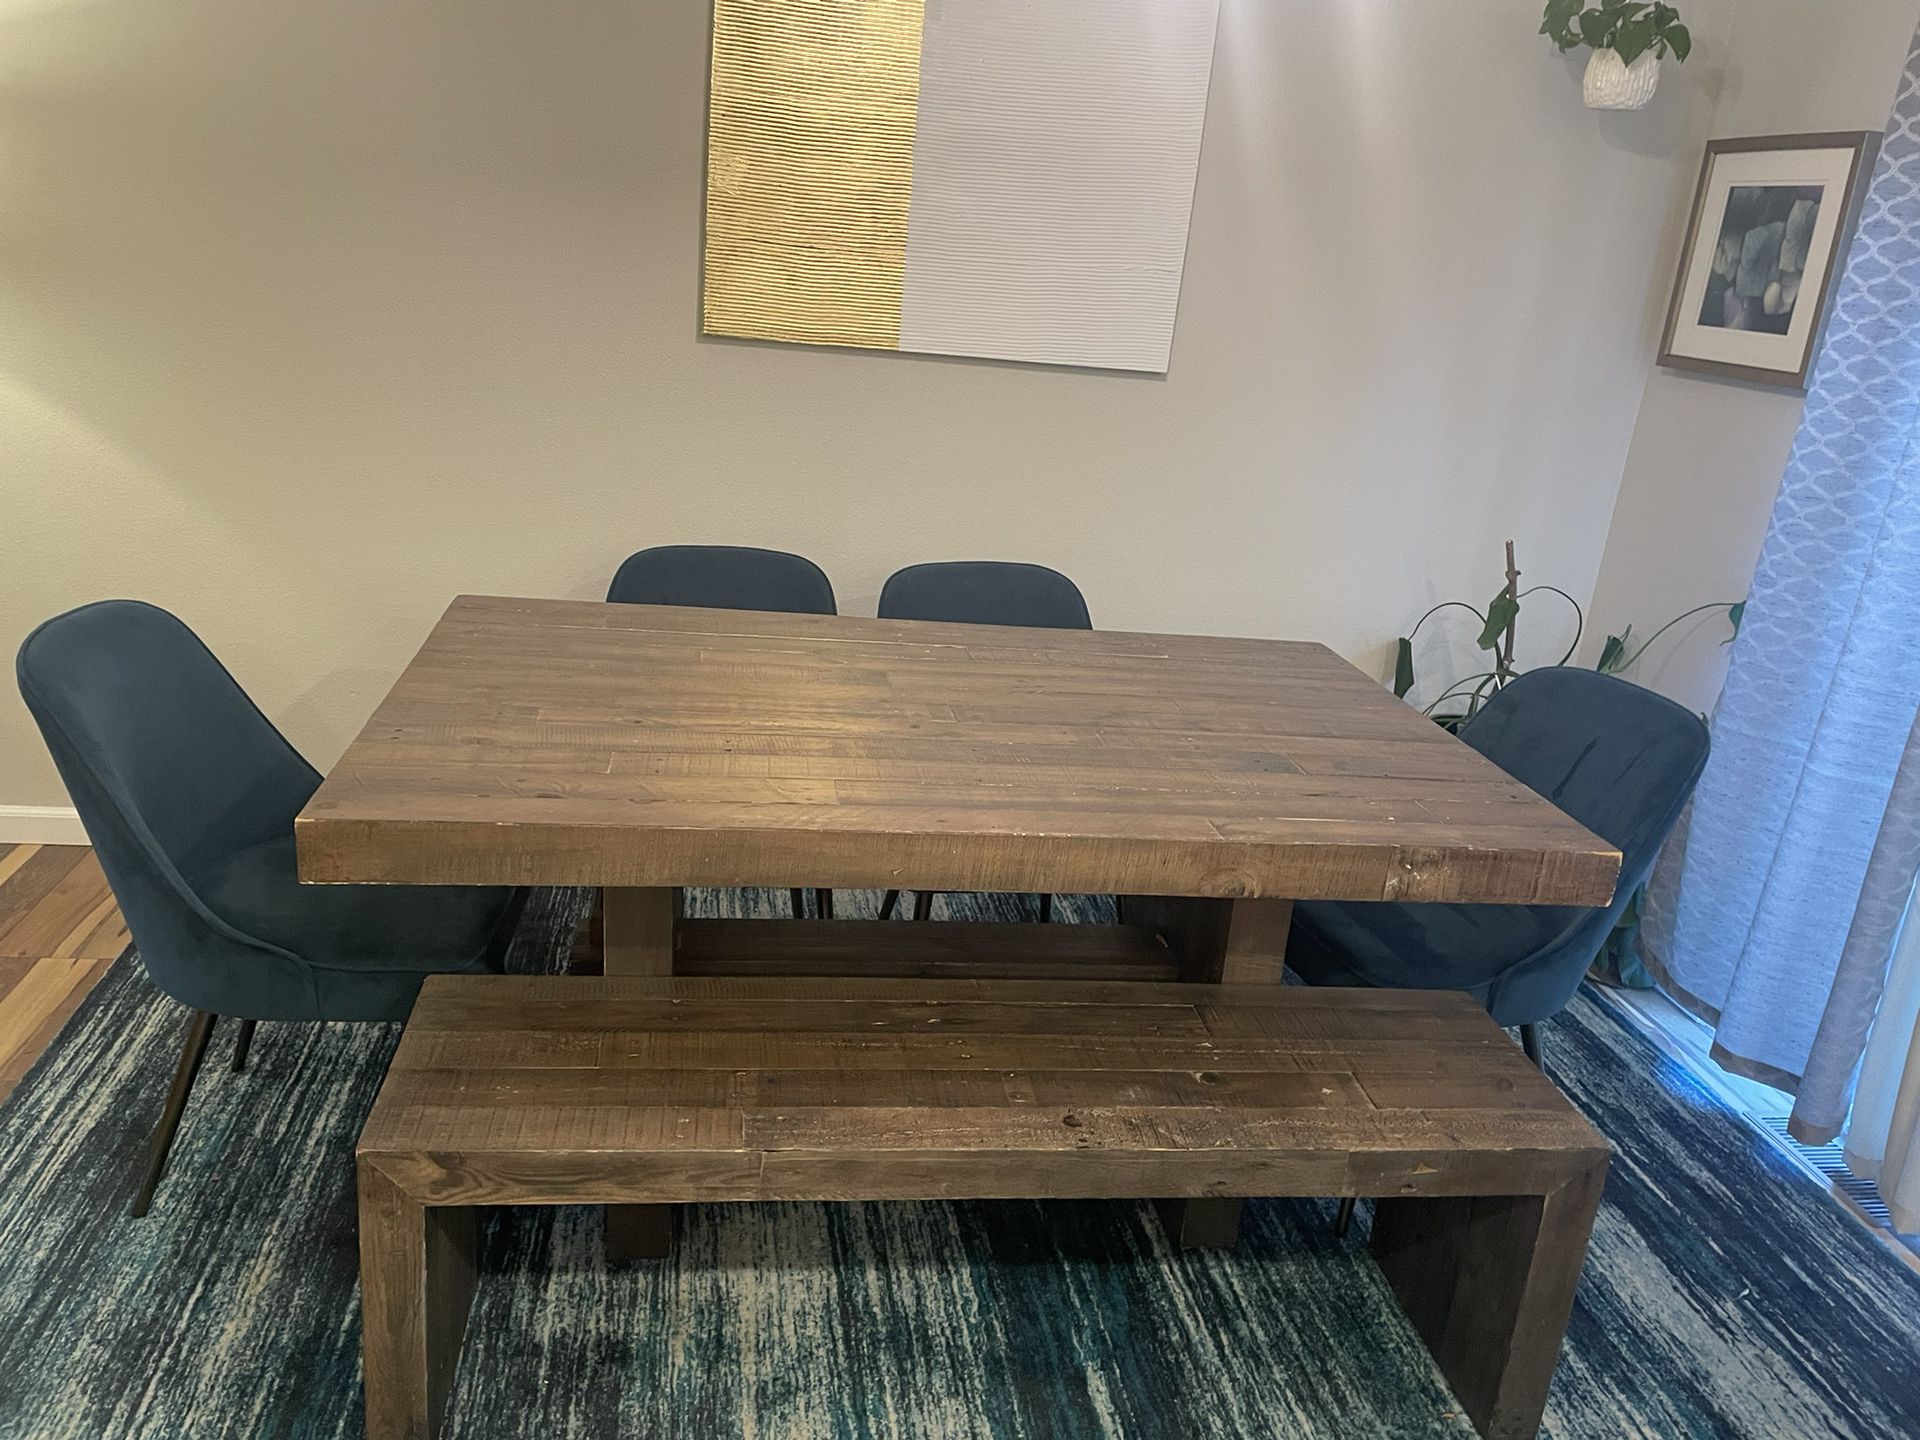 West Elm Dining Table, Chairs & Bench